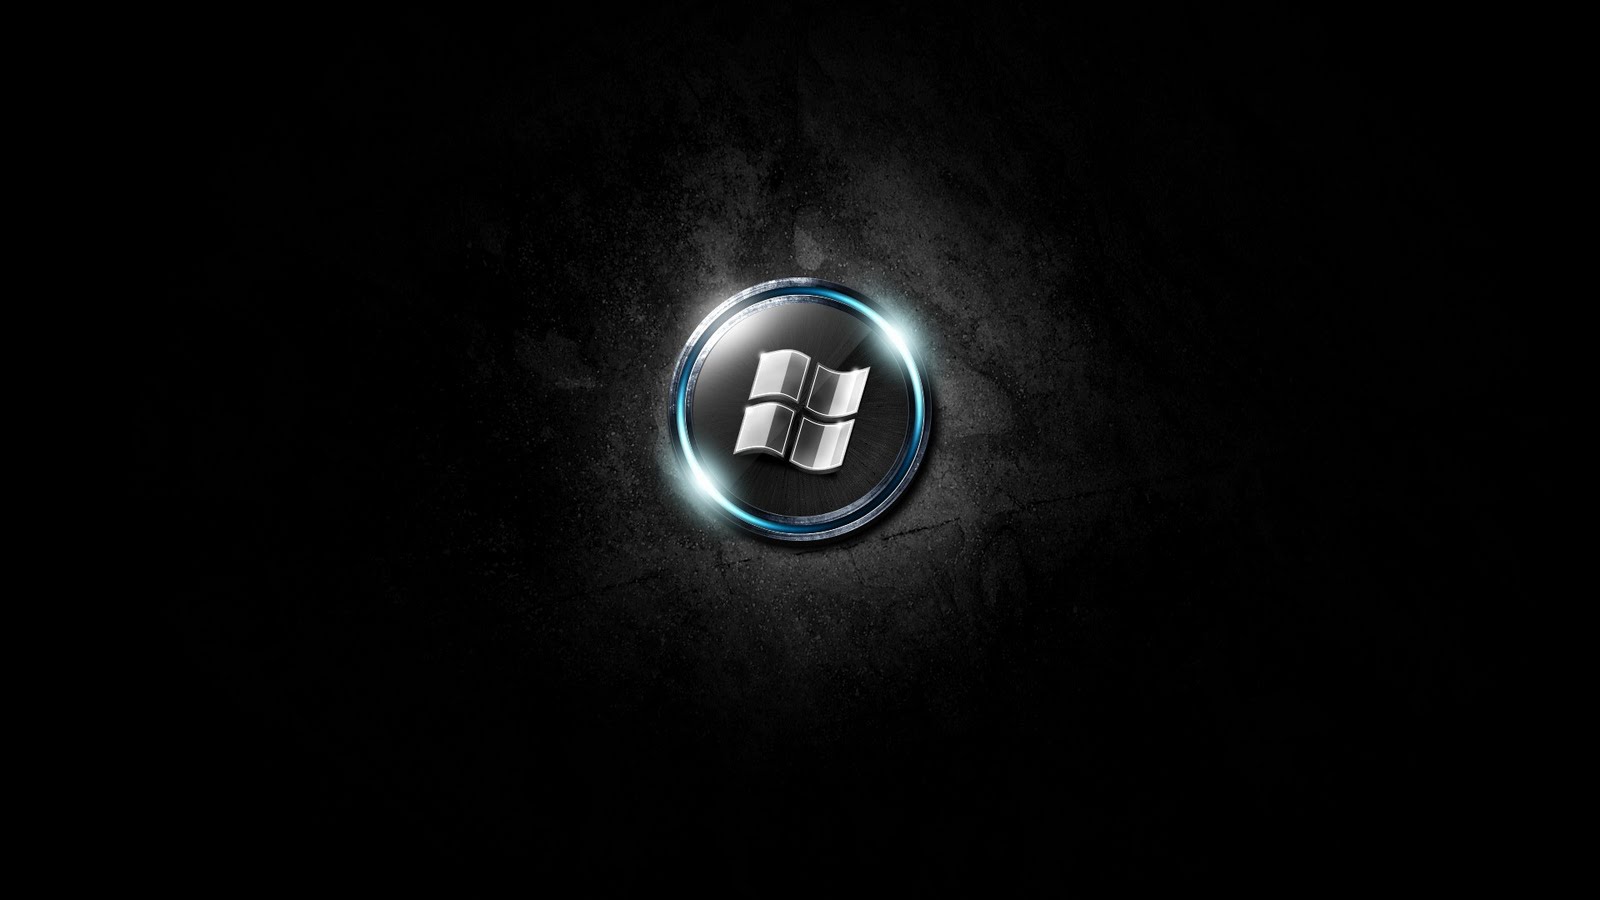 cool windows 7 logo full hd wallpaper is a great wallpaper for your